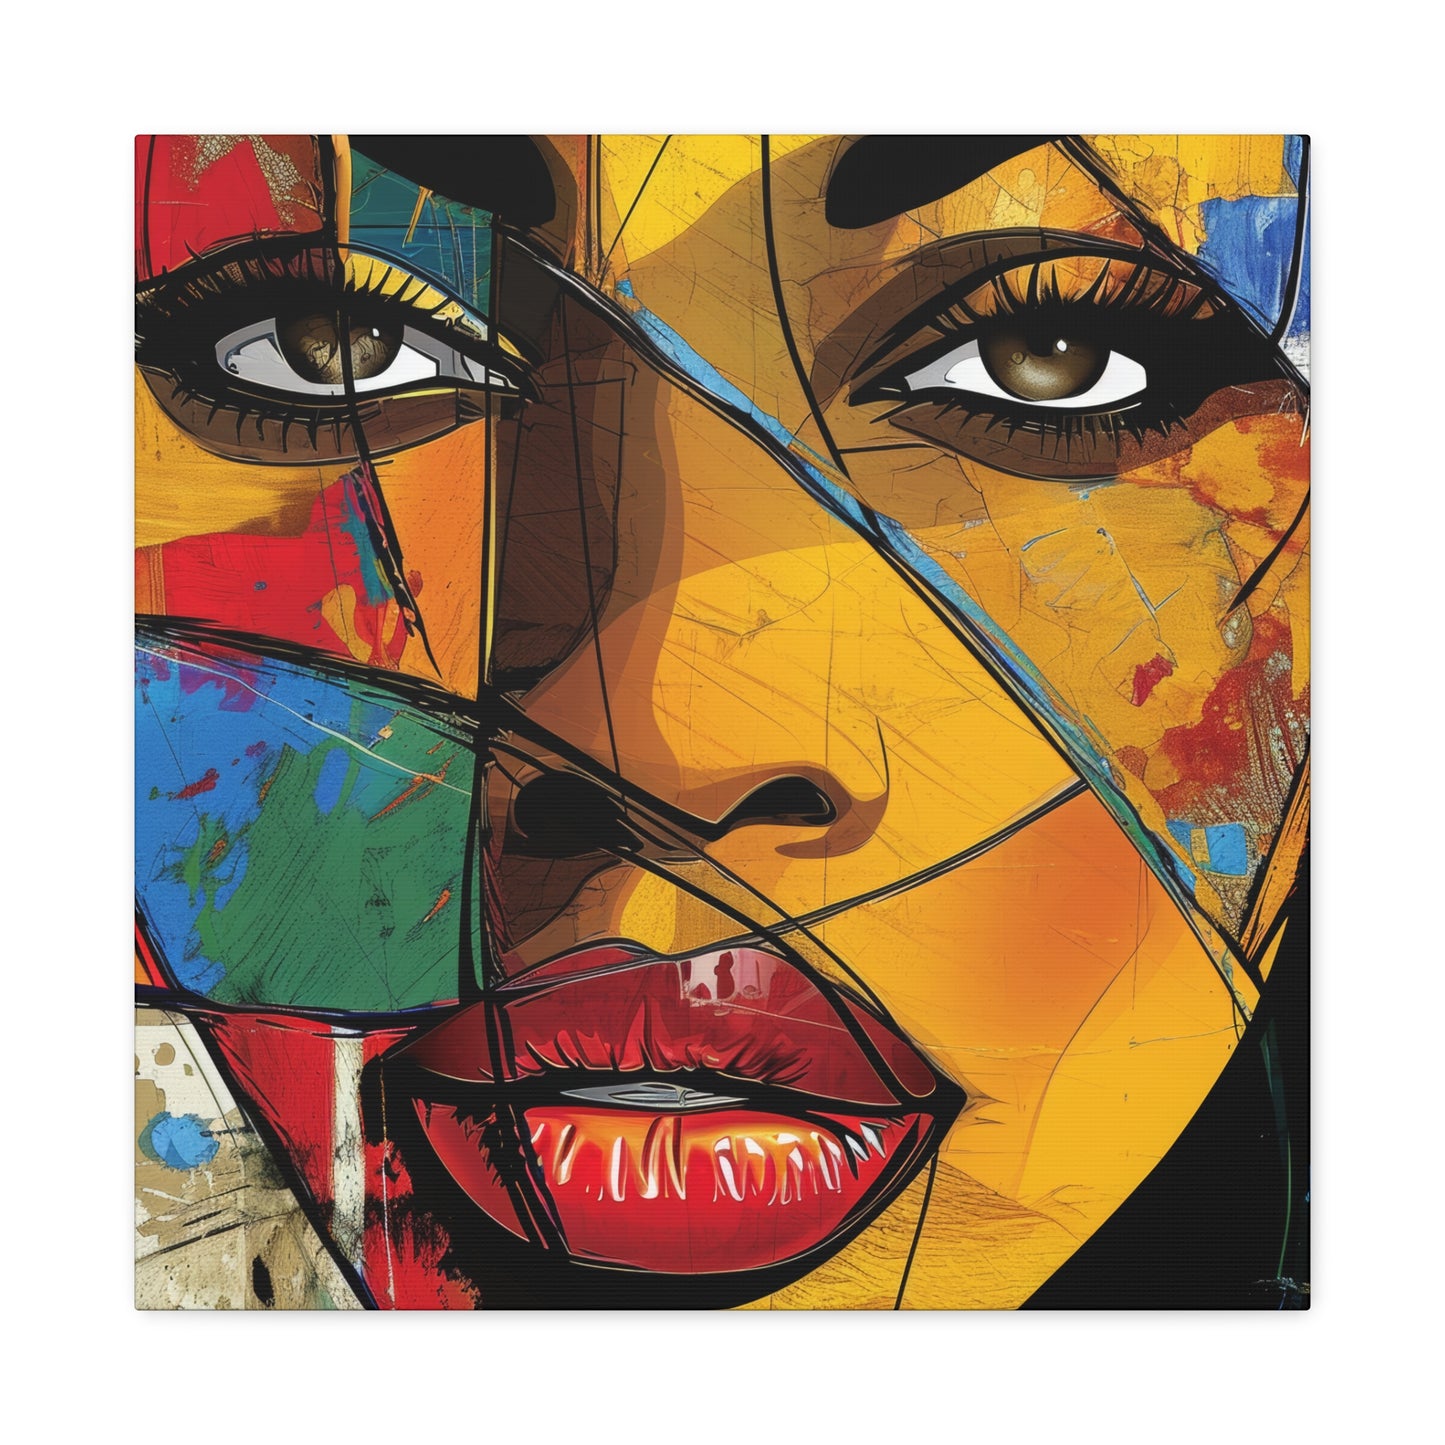 Spectrum of Expressions Canvas Art featuring a colorful African American woman portrait by EbMerized Creations.